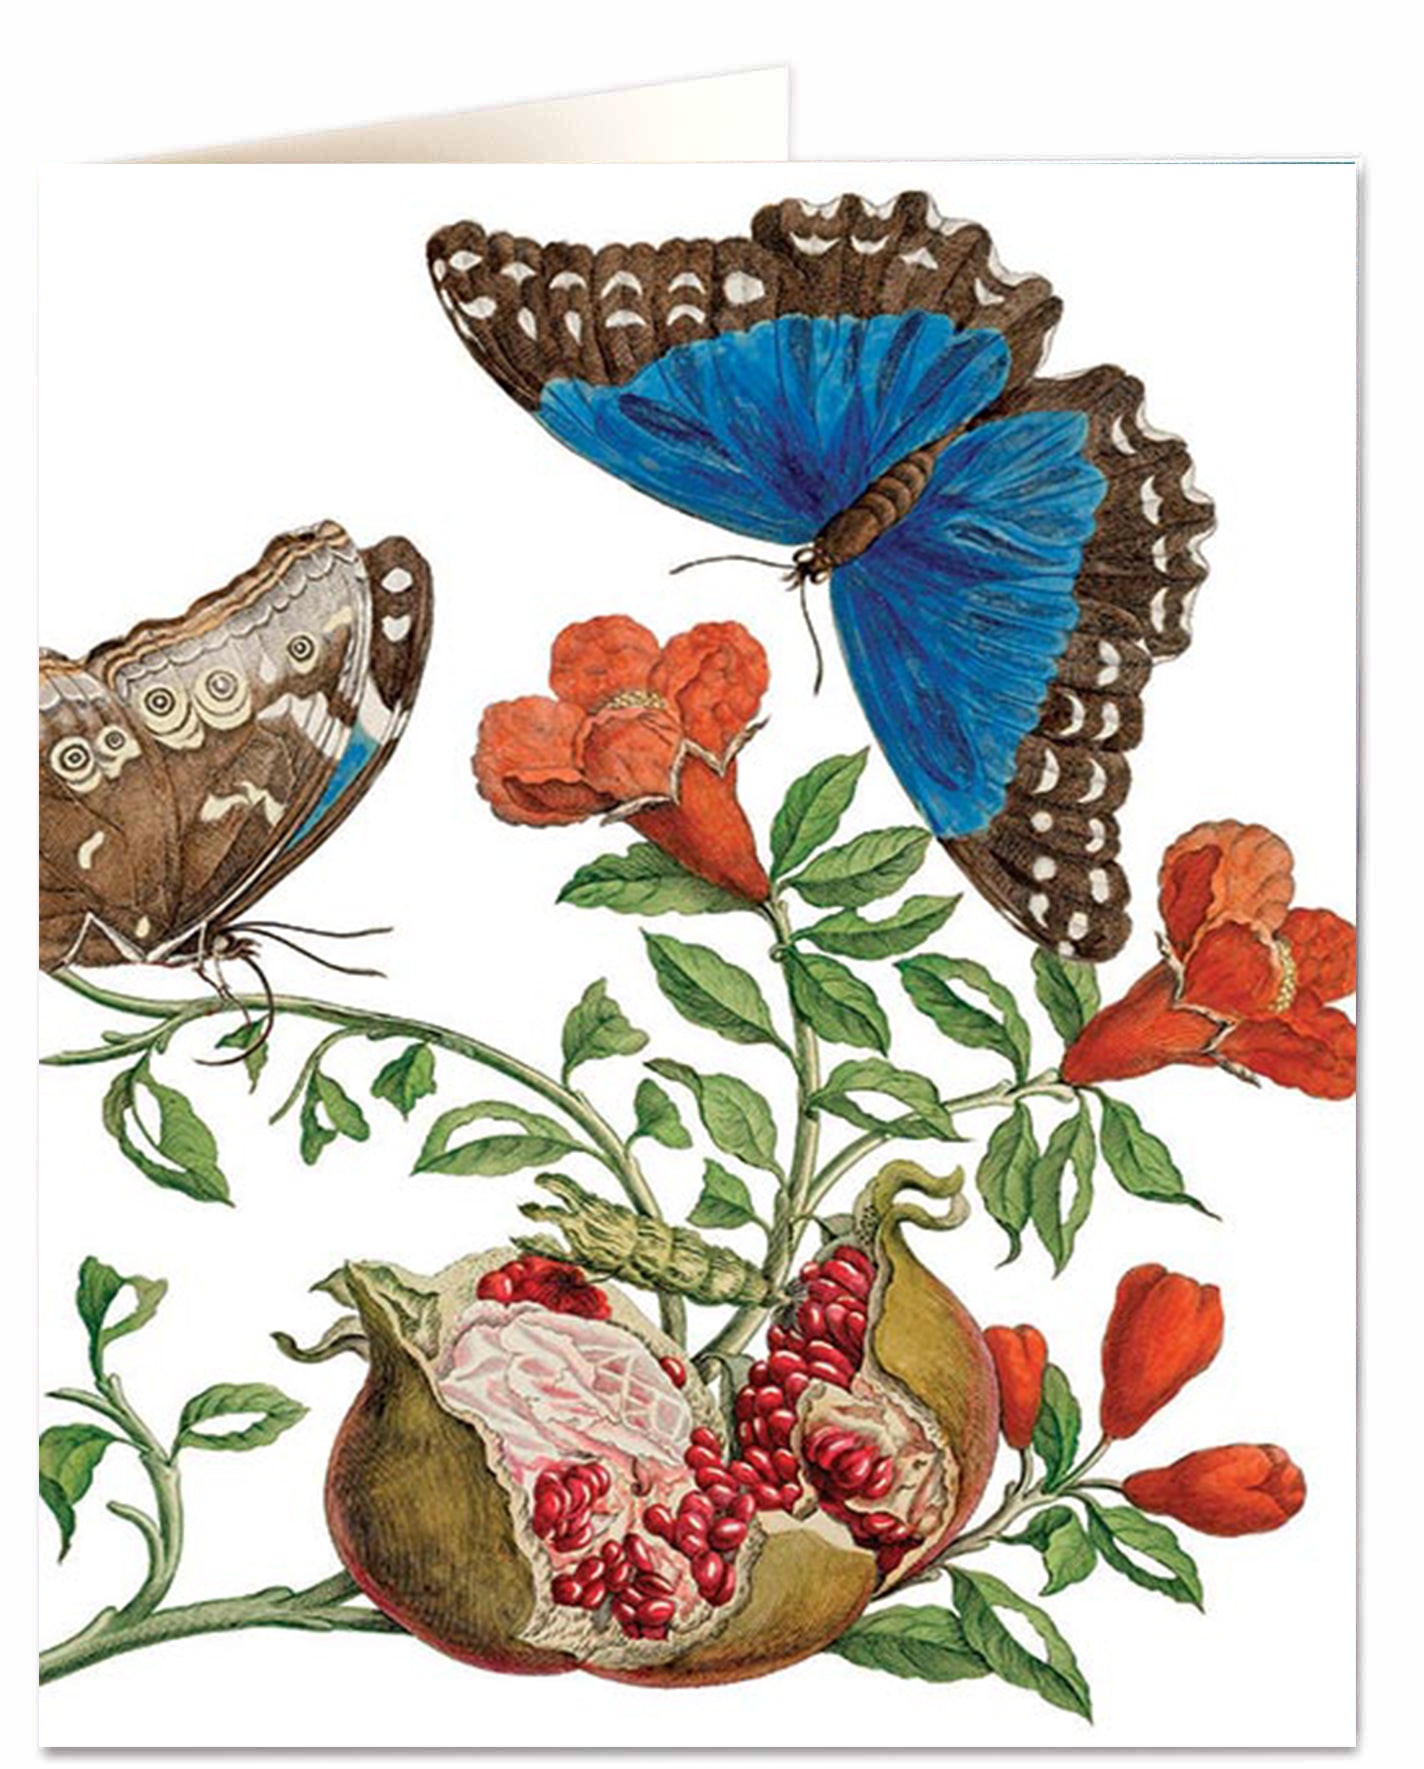 Insects of Surinam Card